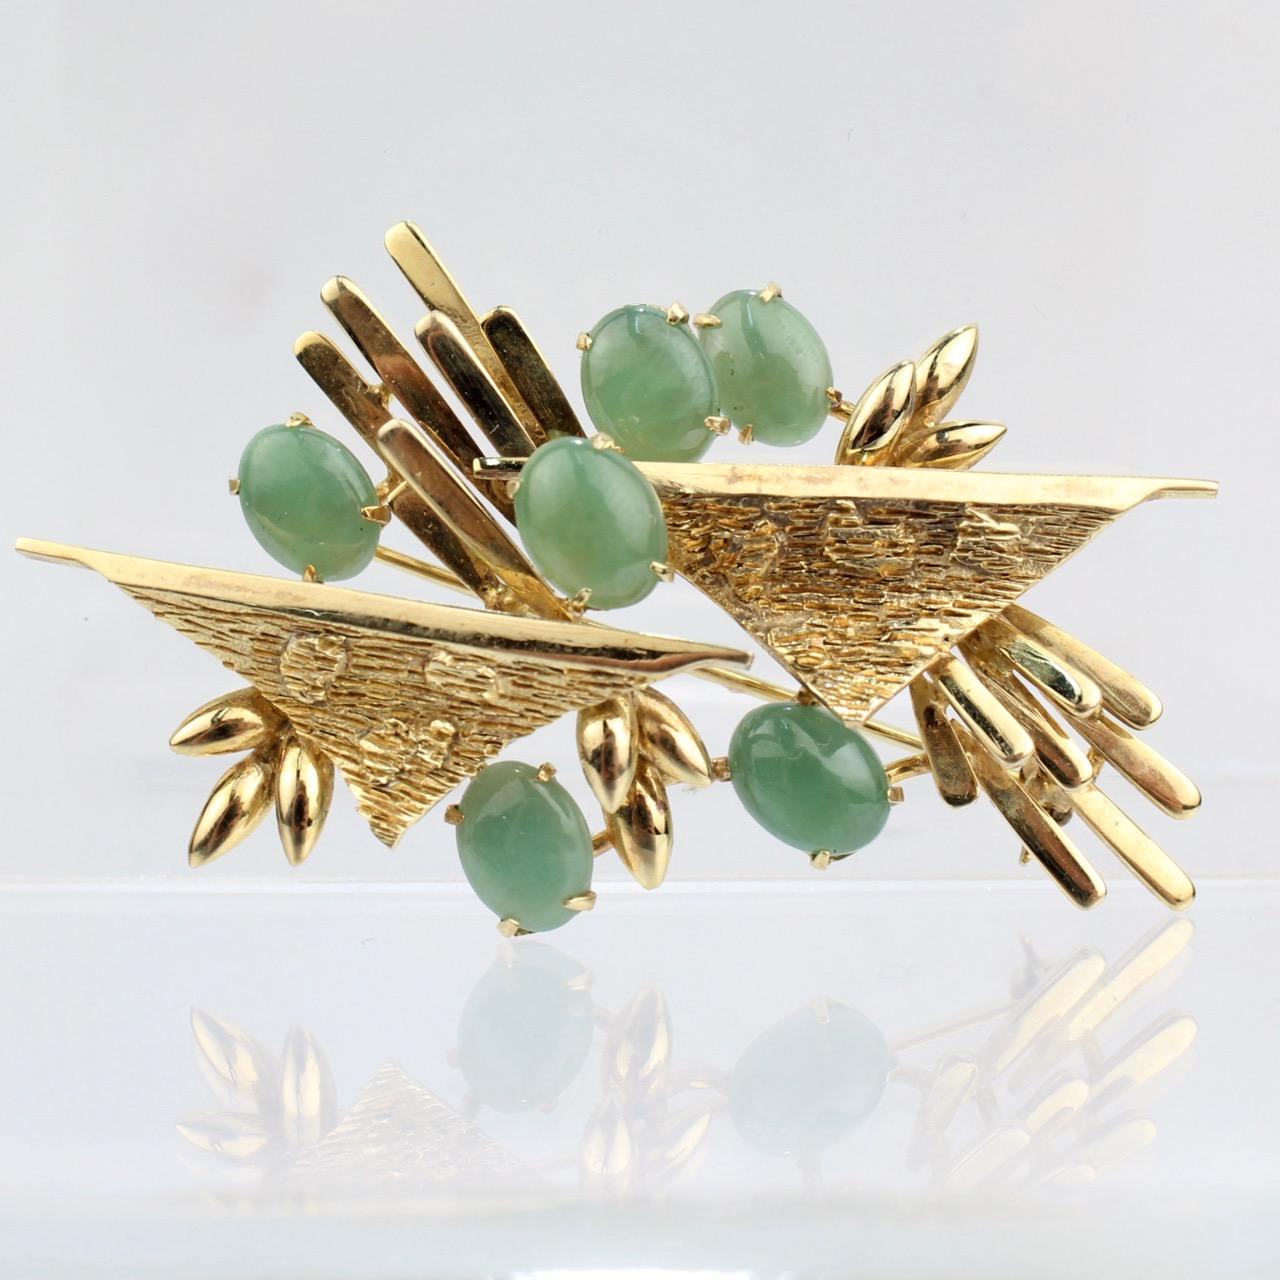 A wonderful 18k gold and nephrite jade brooch. 

With textured gold elements offset with 6 jade cabochons. 

Simple & visually exciting modernist design!

Marked 18K to the reverse.

Length: ca. 55 mm

Items purchased from this dealer must delight